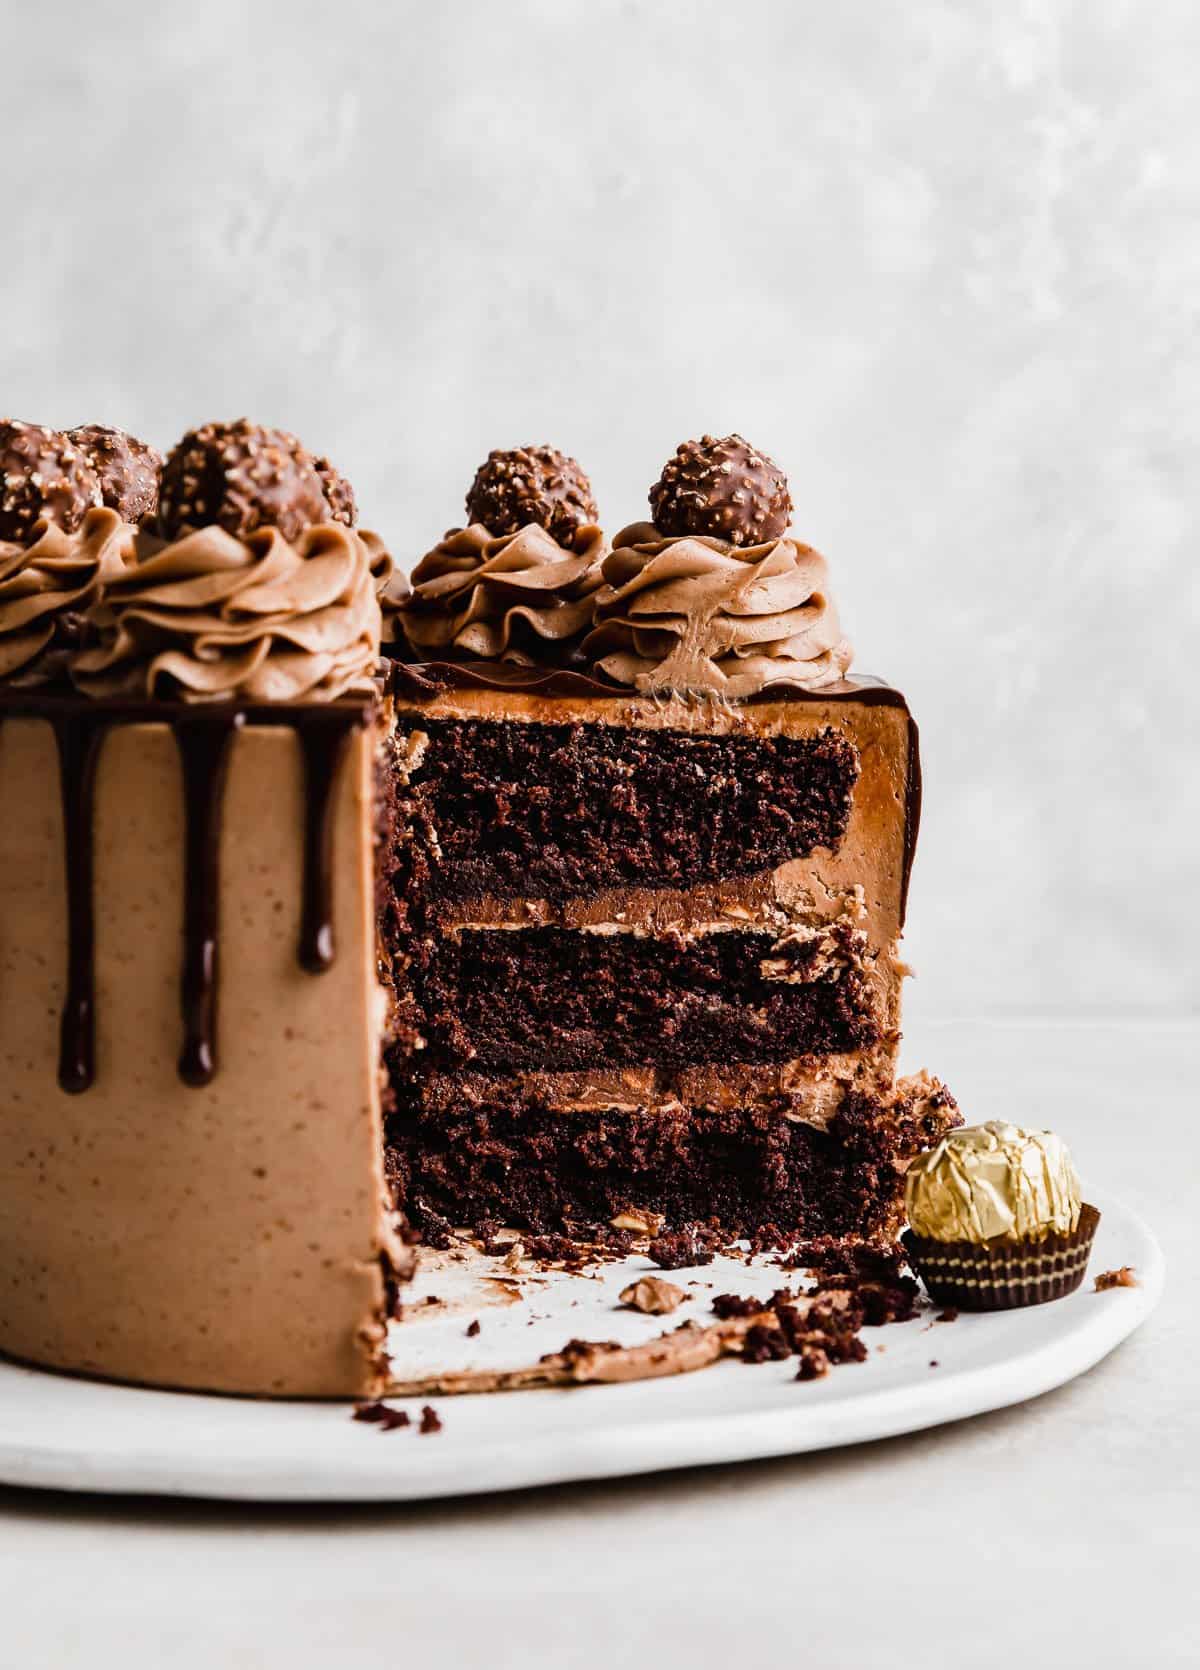 A three layer Ferrero Rocher Cake frosted with chocolate frosting and topped with unwrapped Ferrero Rocher candies.